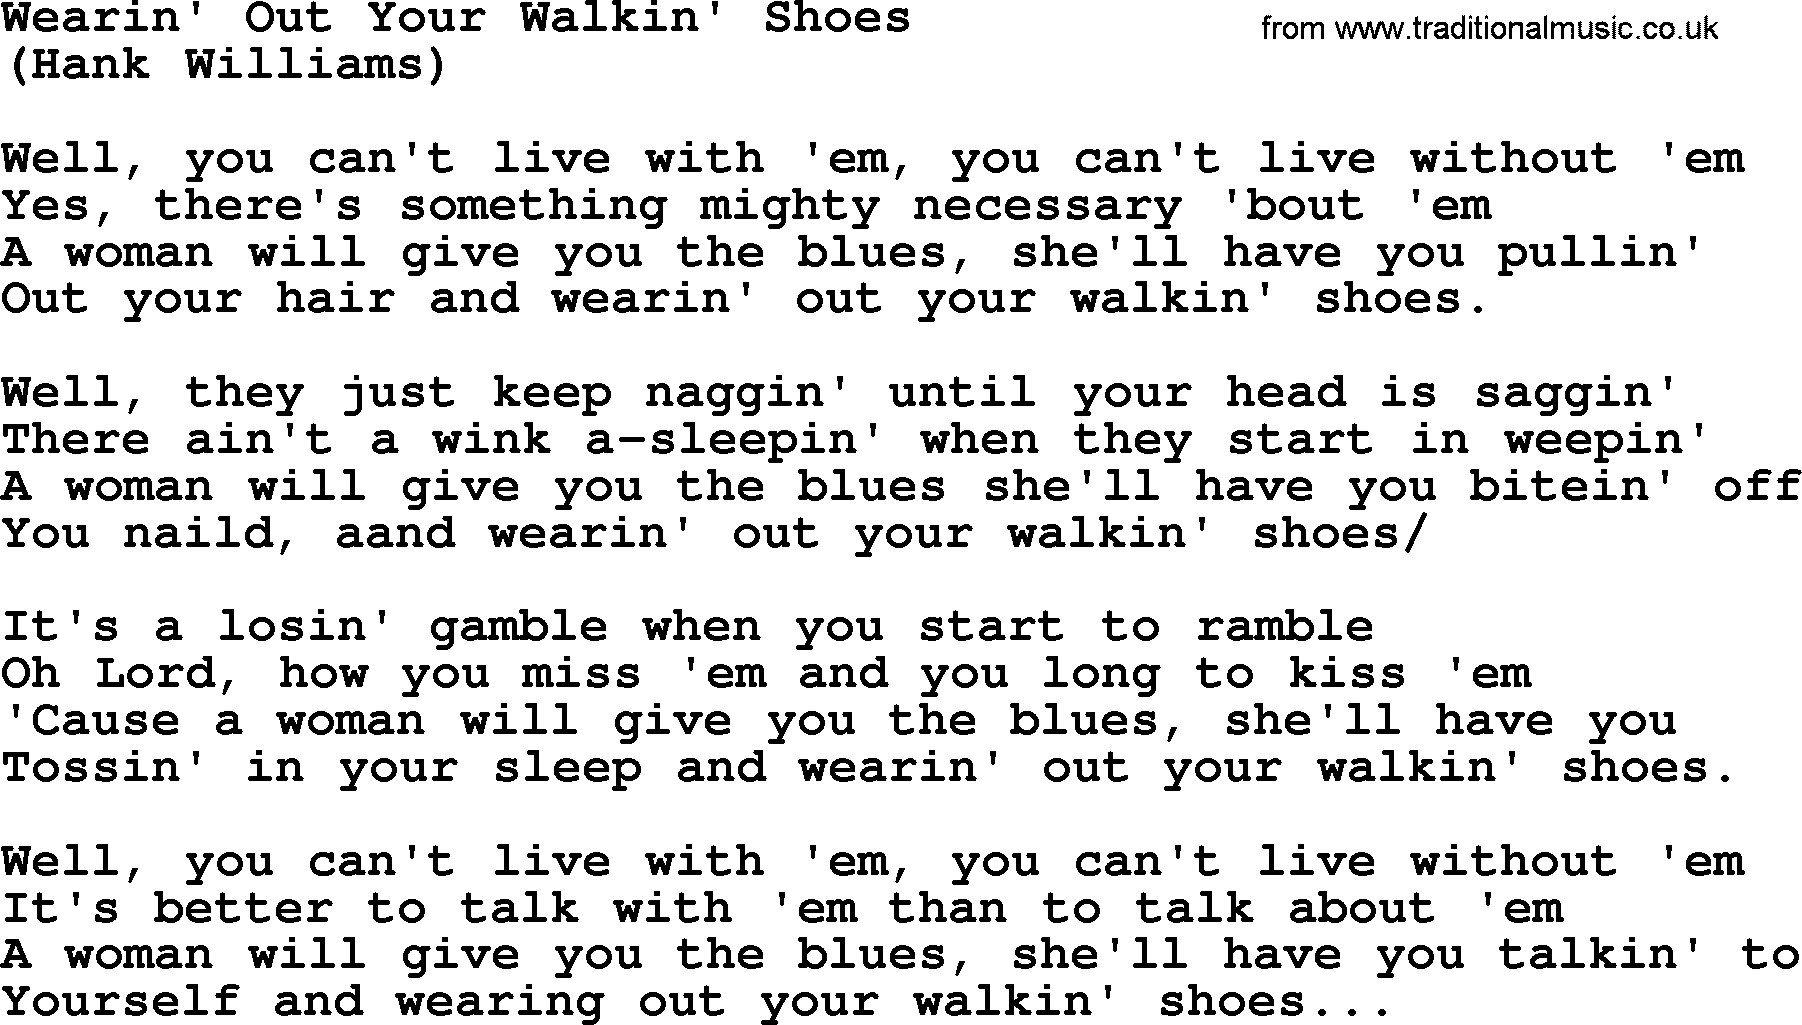 Hank Williams song Wearin' Out Your Walkin' Shoes, lyrics